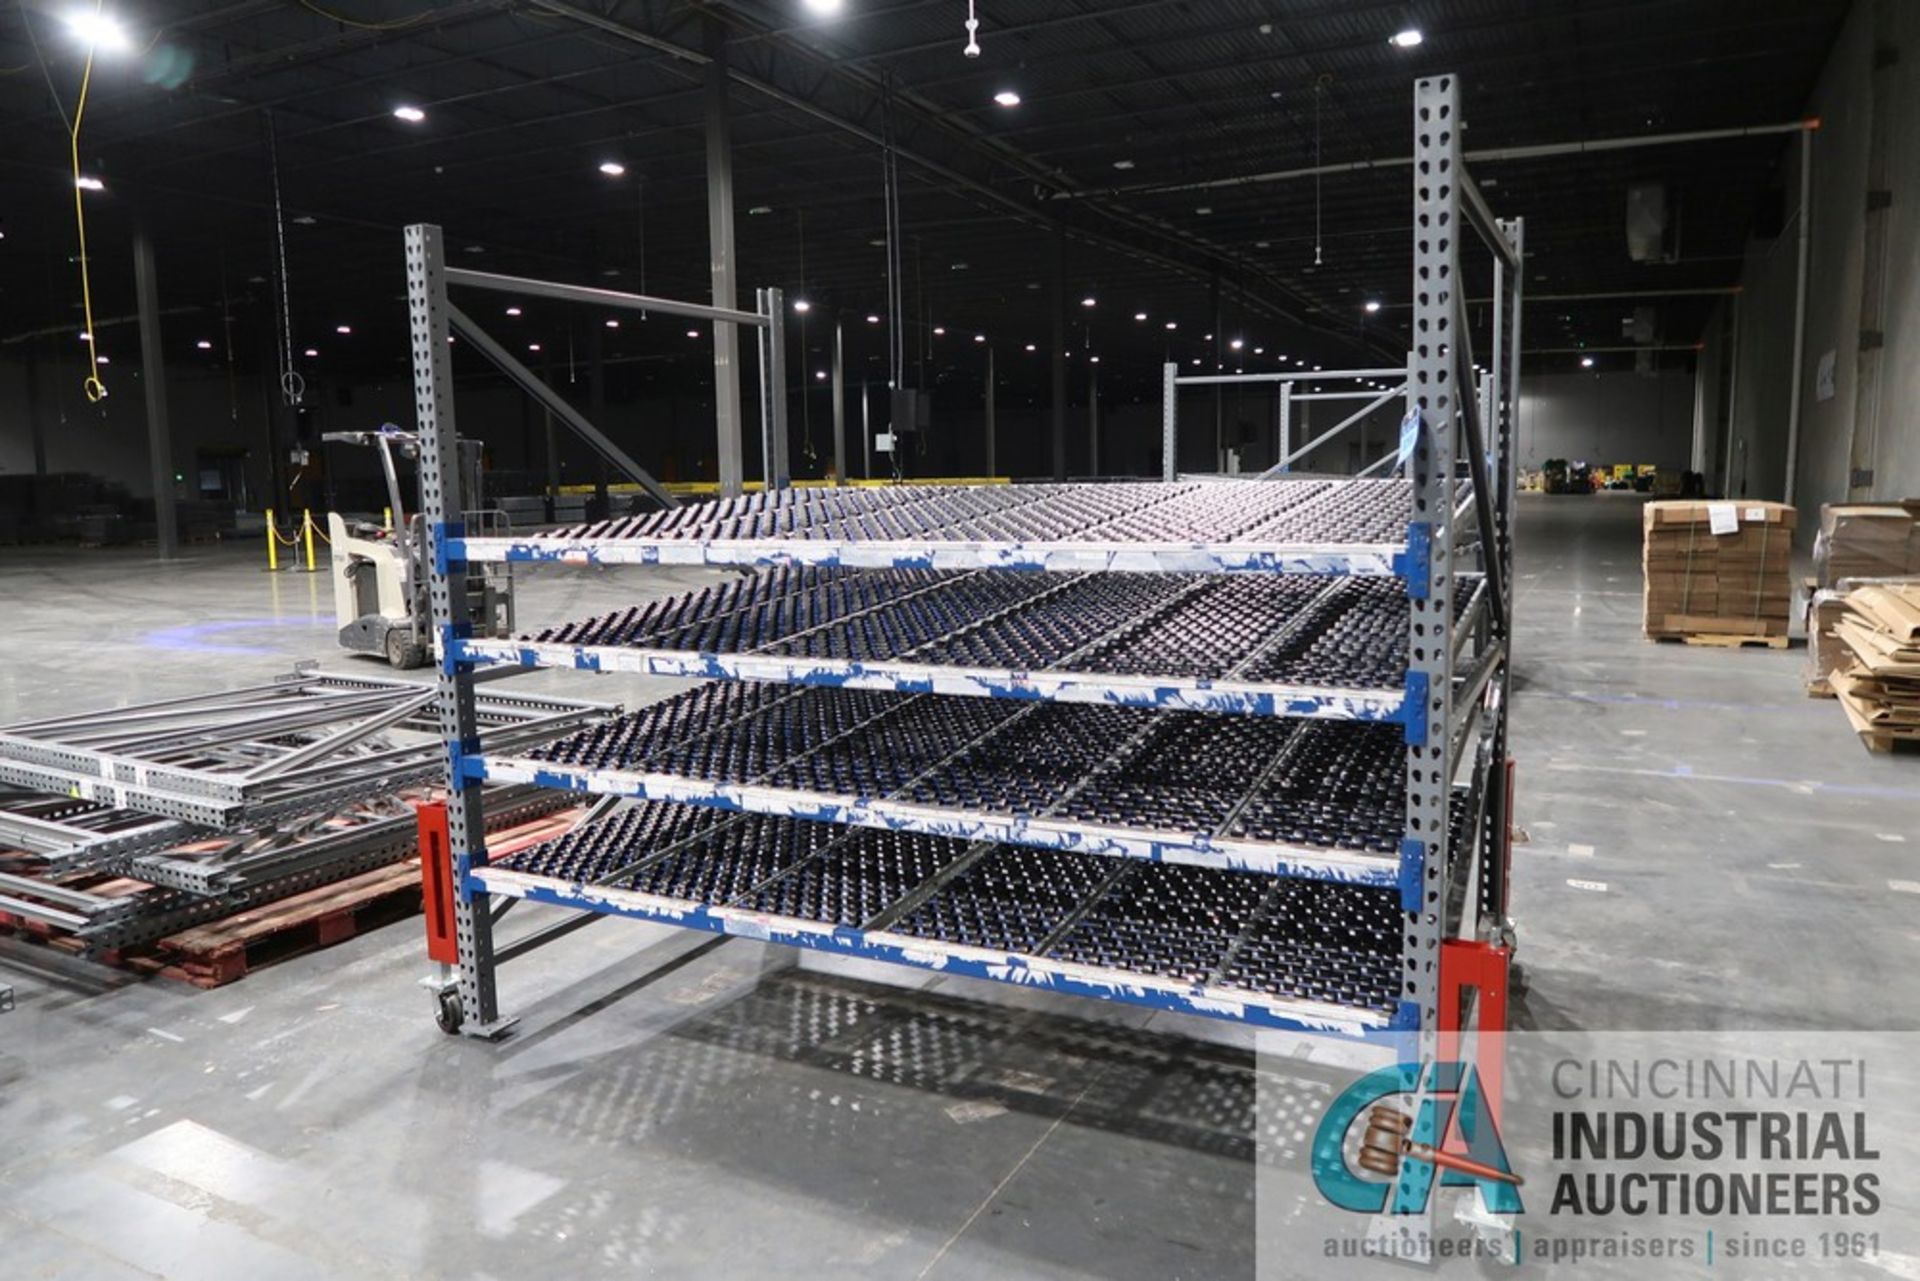 SECTION 108" LONG X 72" WIDE X 96" HIGH PORTABLE TEARDROP STYLE FLOW RACK INCLUDING (2) 72" X 96"